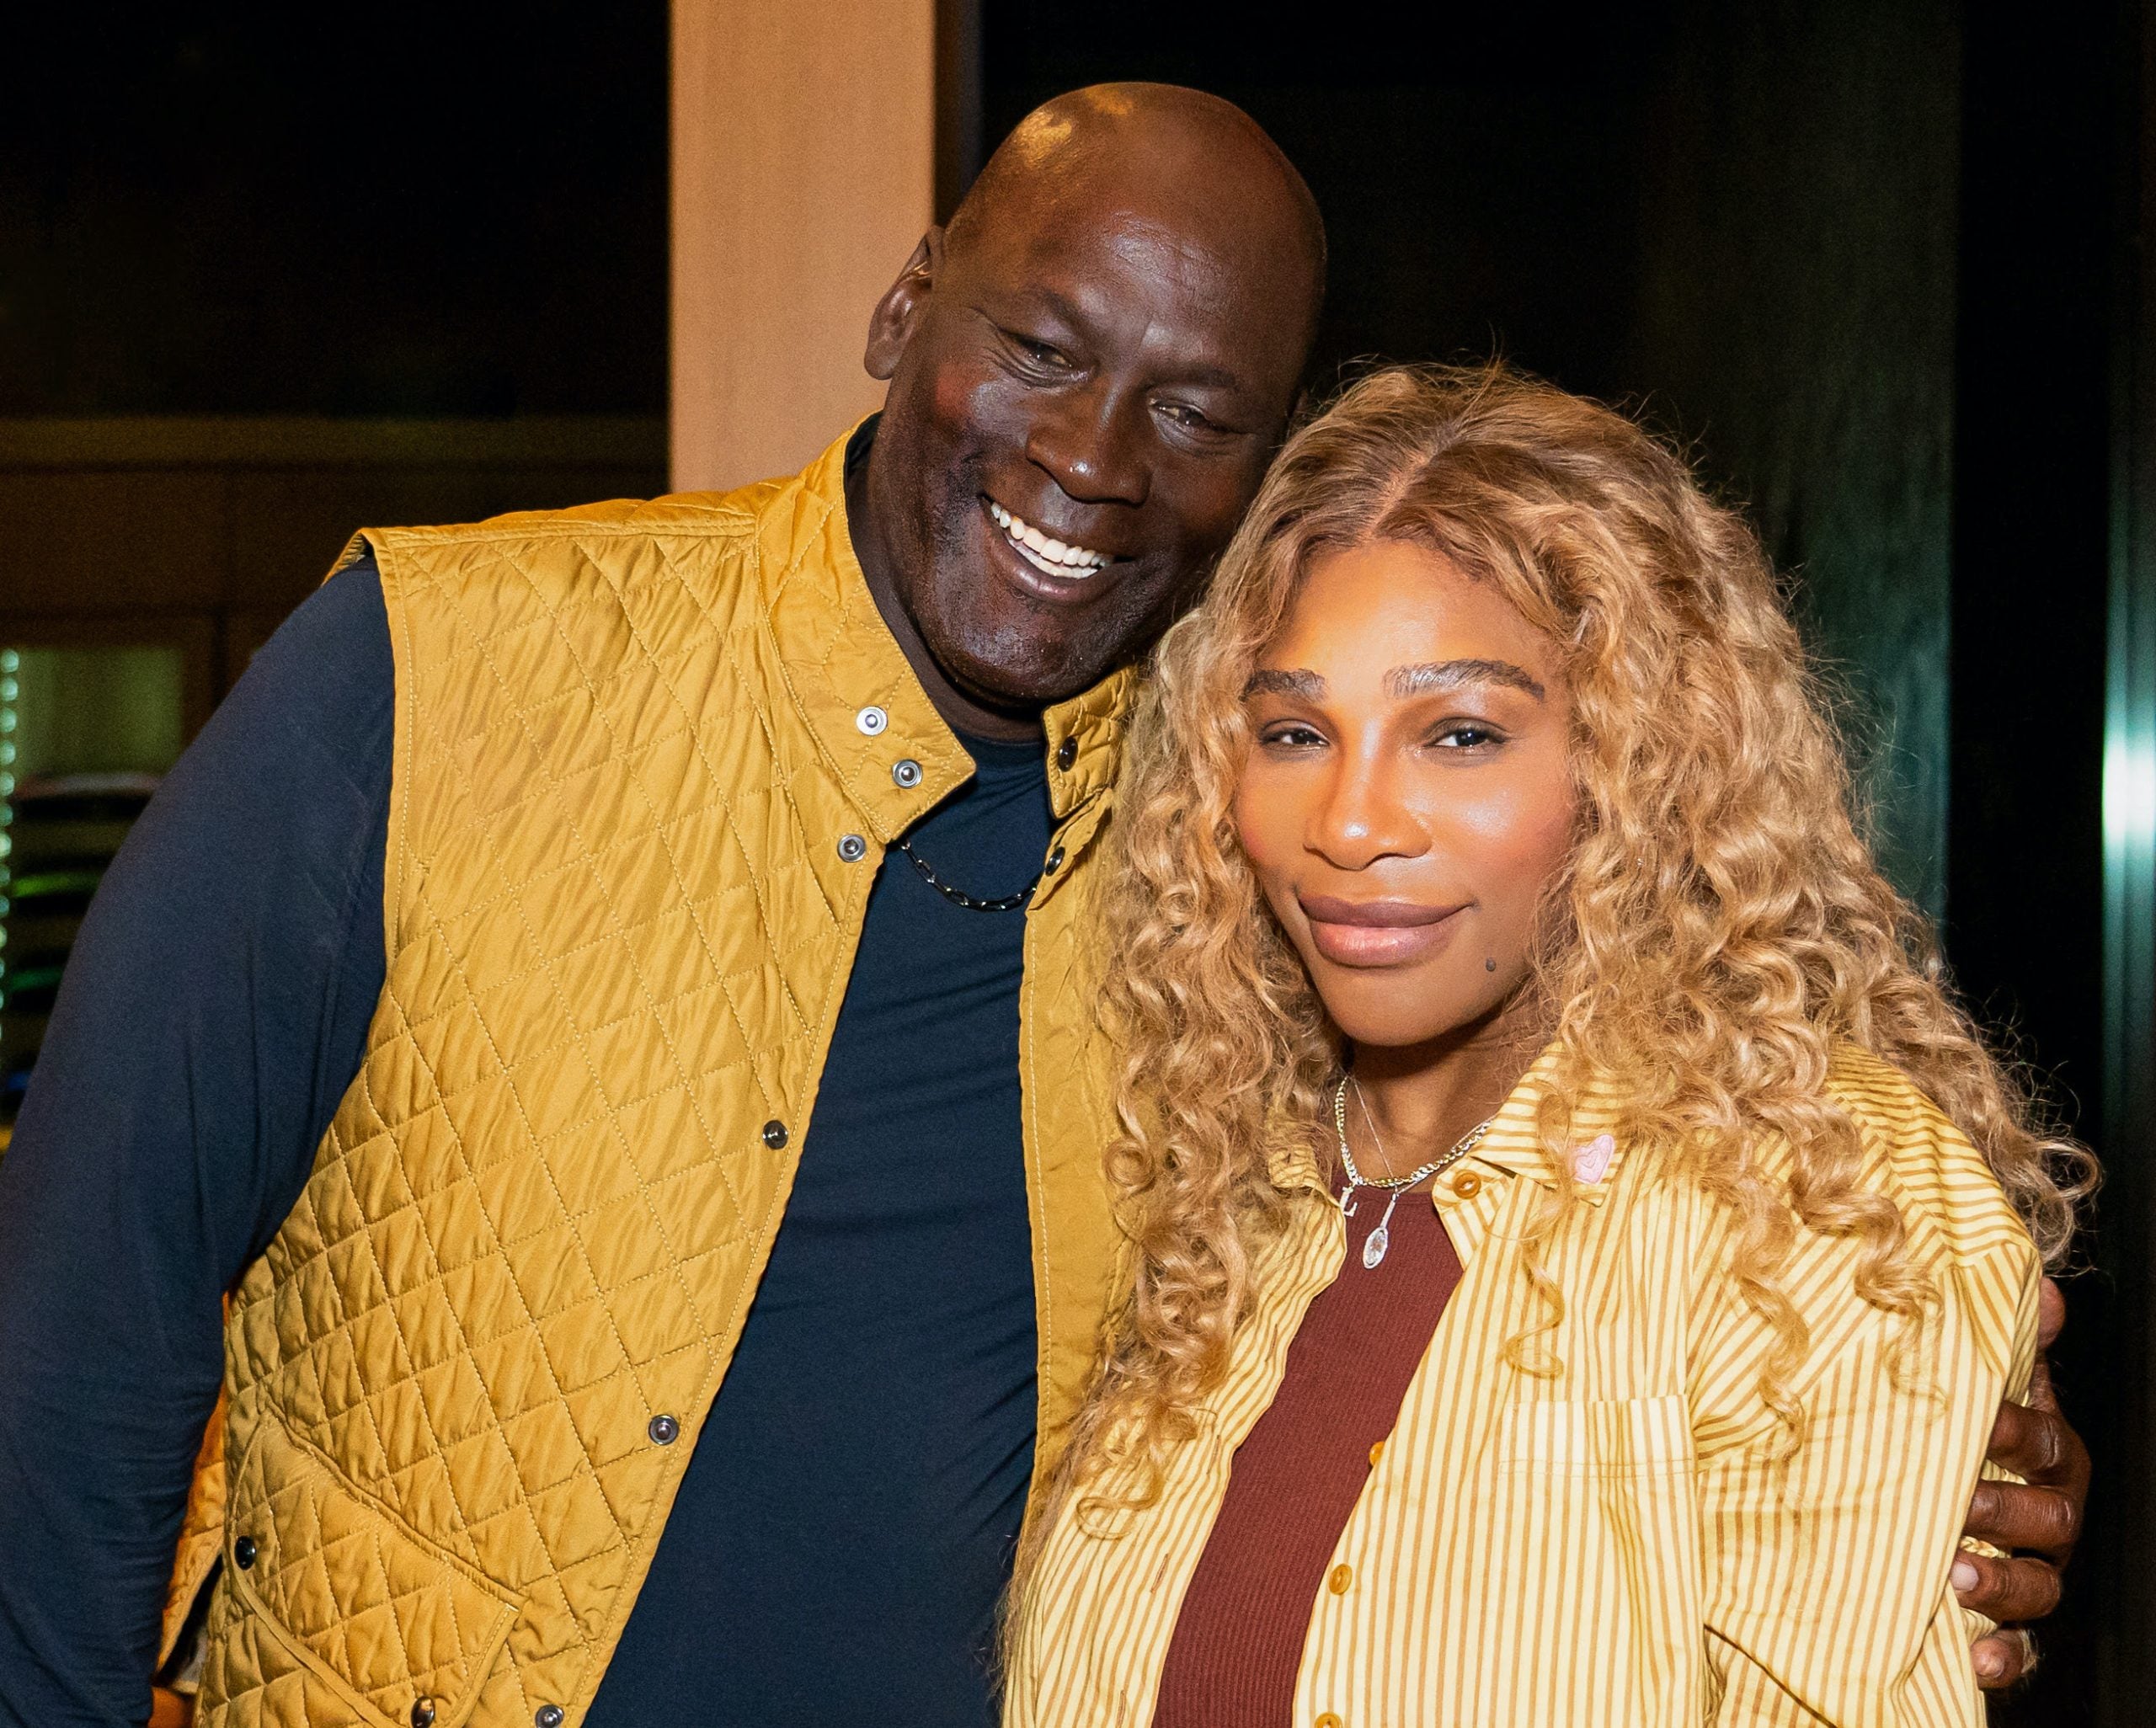 Serena Williams Is Now A Co-Owner Of Michael Jordan’s Cincoro Tequila Brand